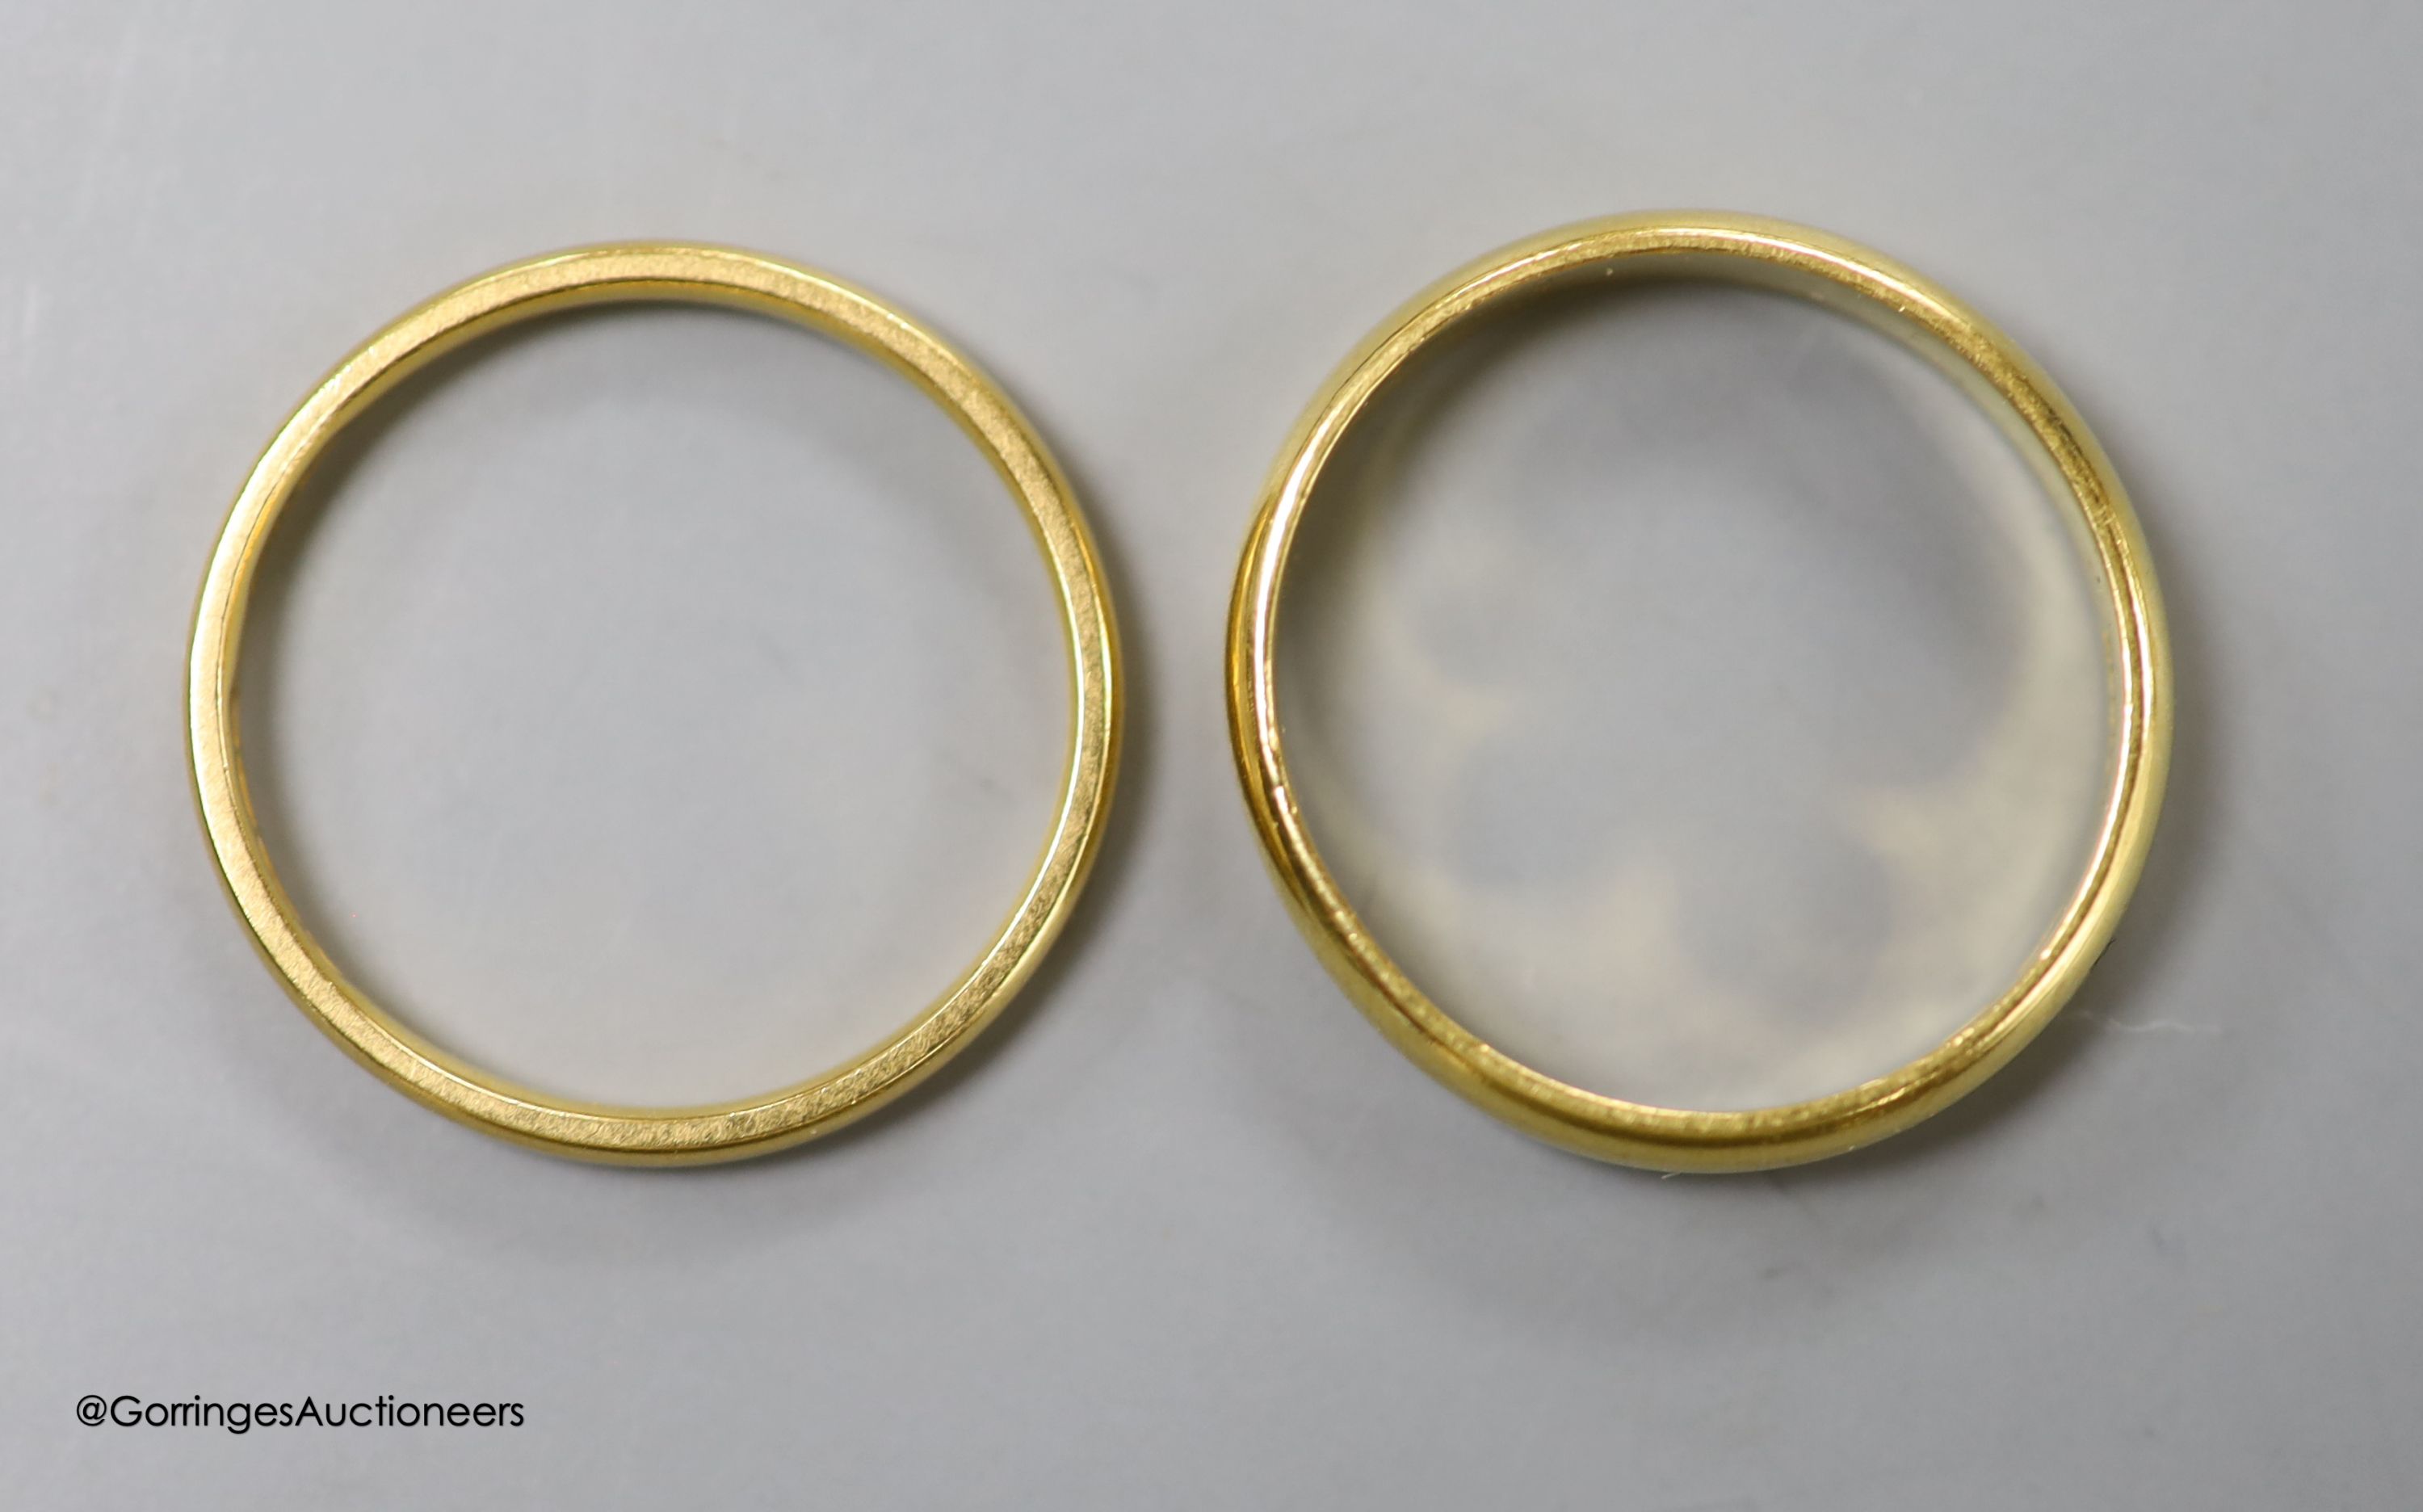 Two 22ct gold wedding bands, 6.9g